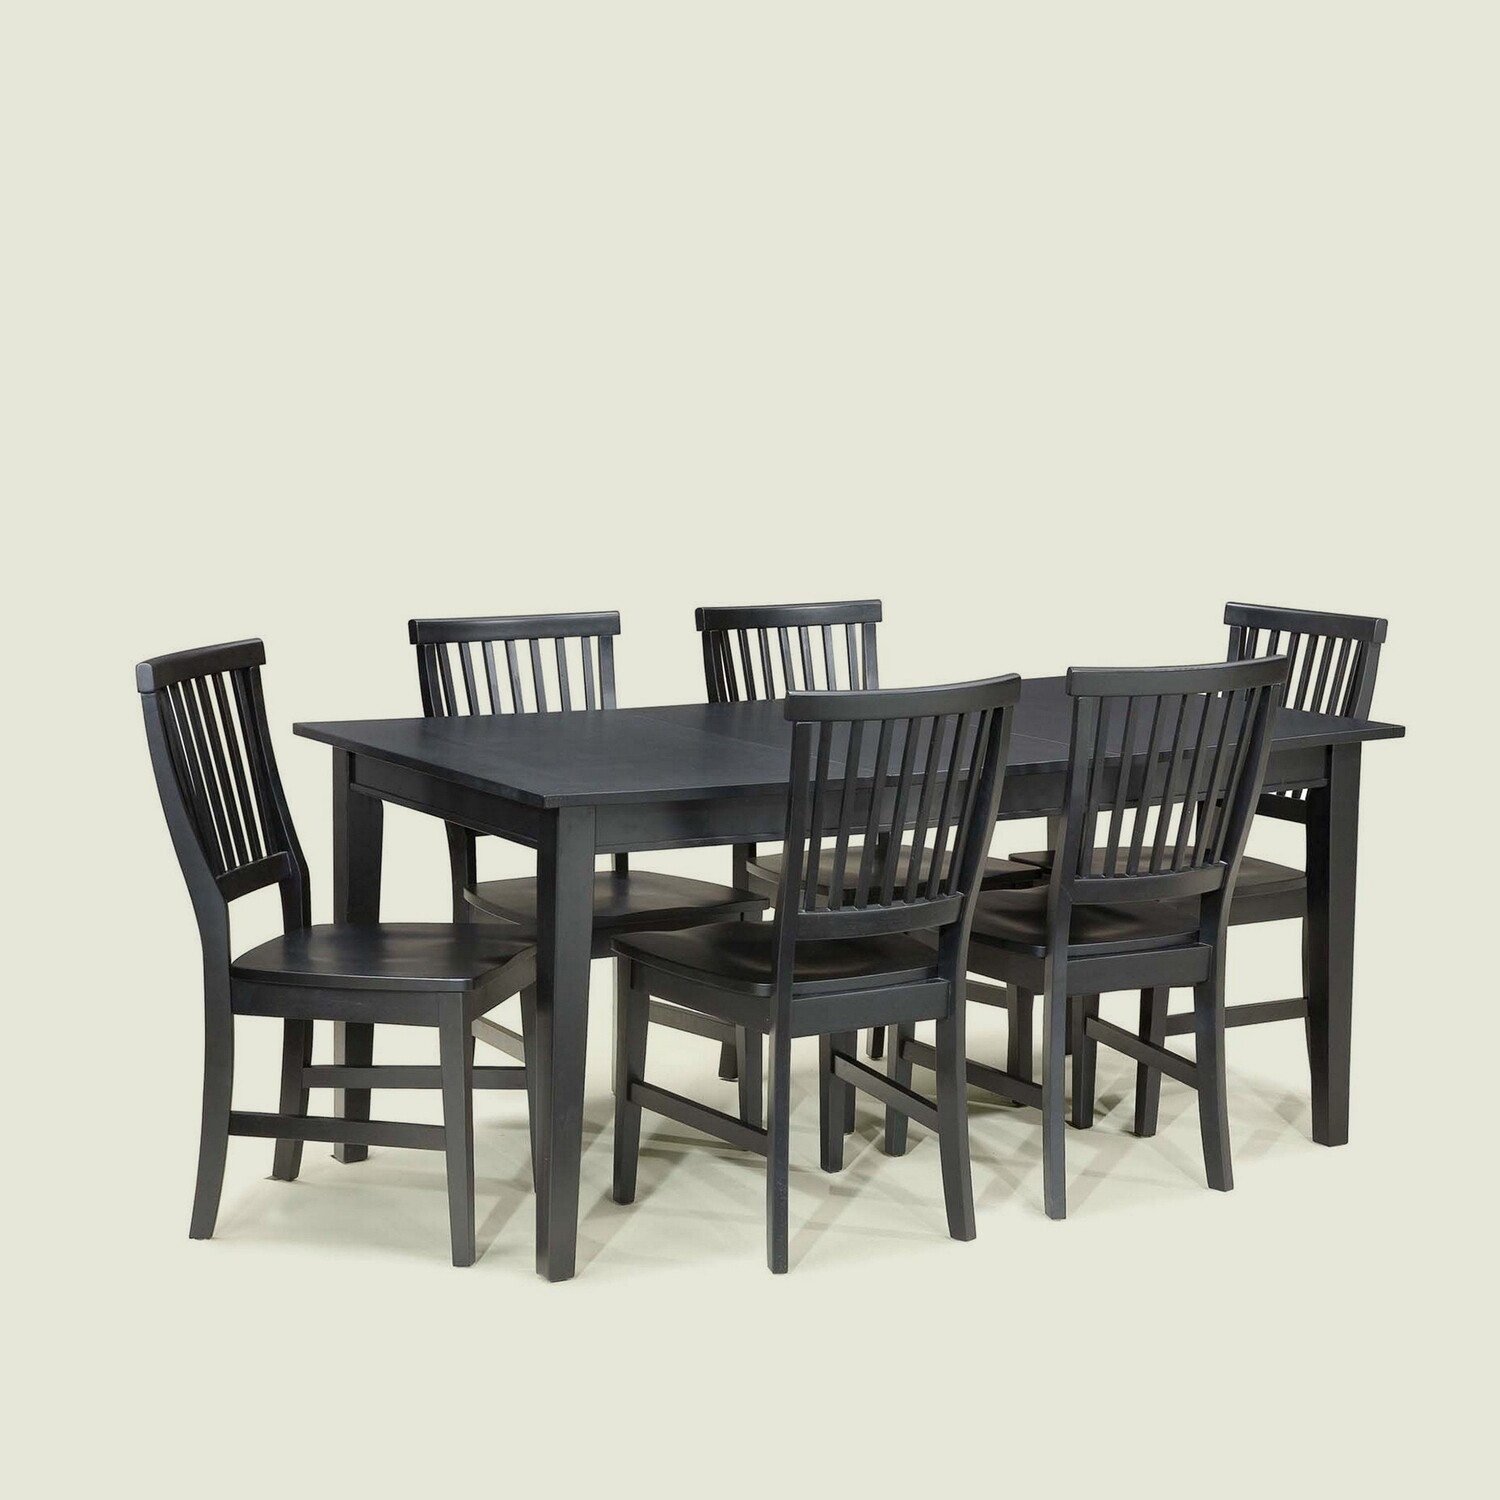 Jerry Dining Table Set - 6 Seater/150 cm